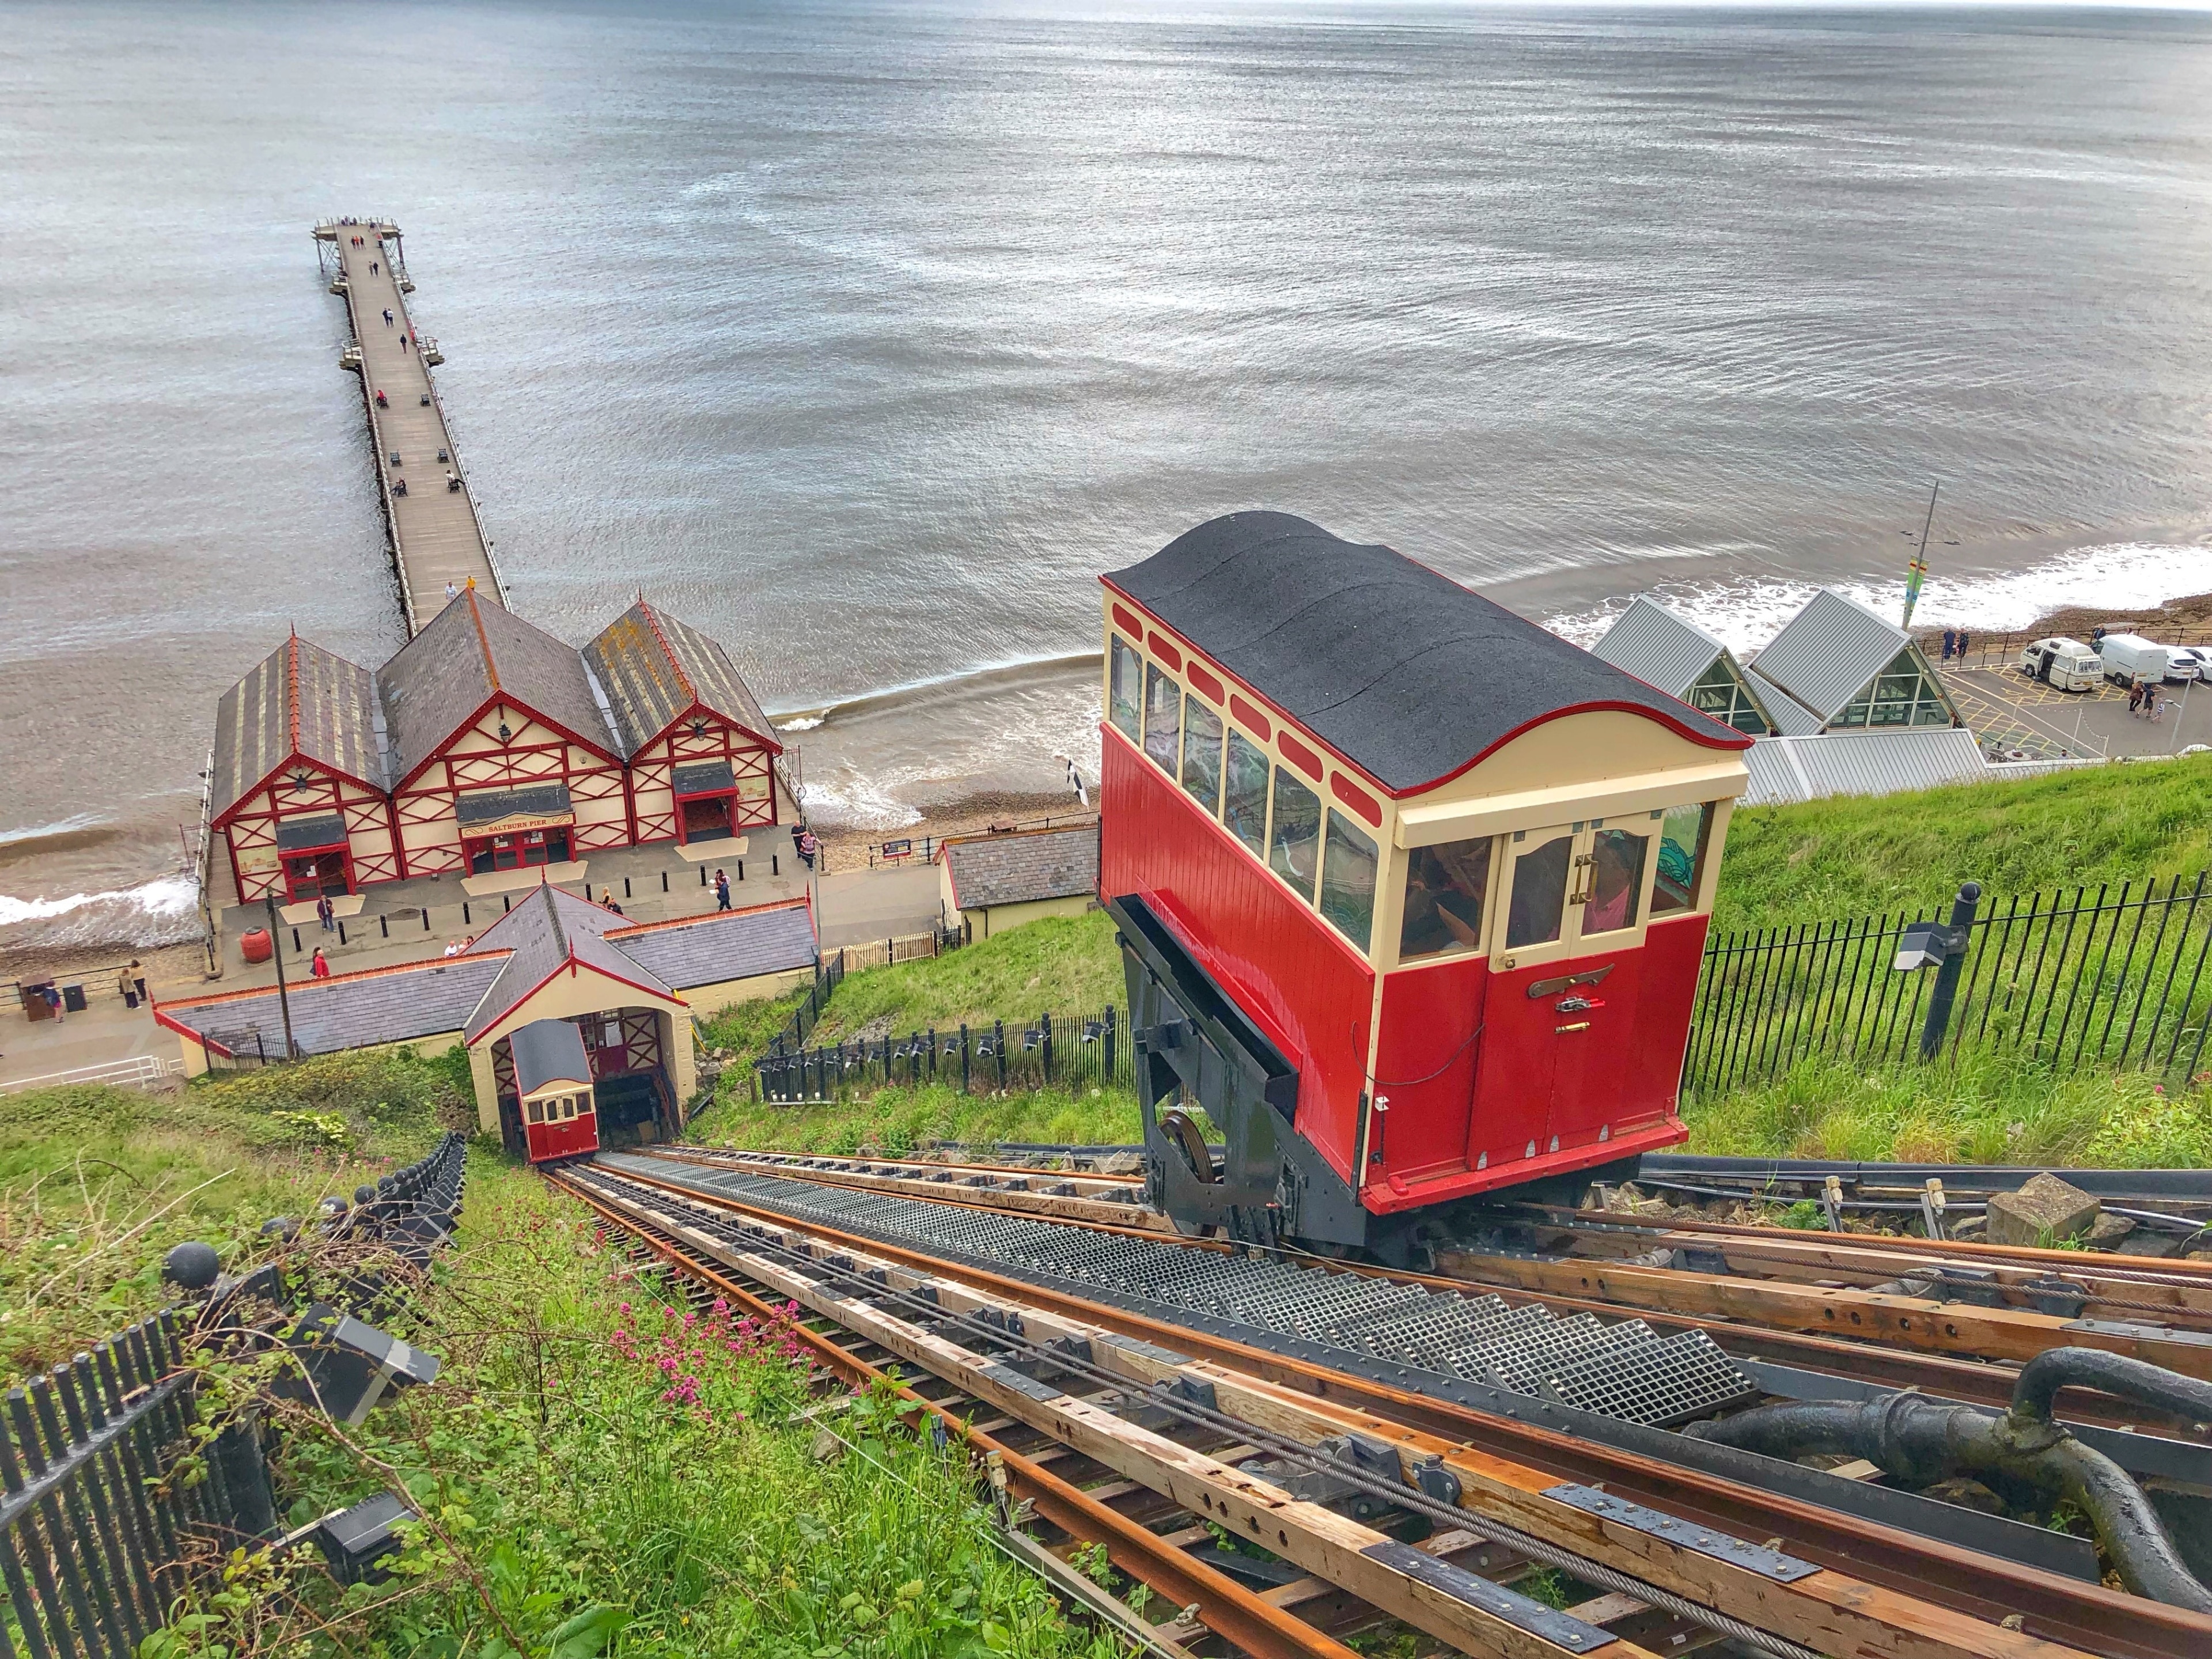 This is the oldest water balanced funicular still in operation in the United Kingdom. Doesn’t cost much to ride and the carriages are decked out with stained glass. There are some lovely views from the top out over the pier and coast.